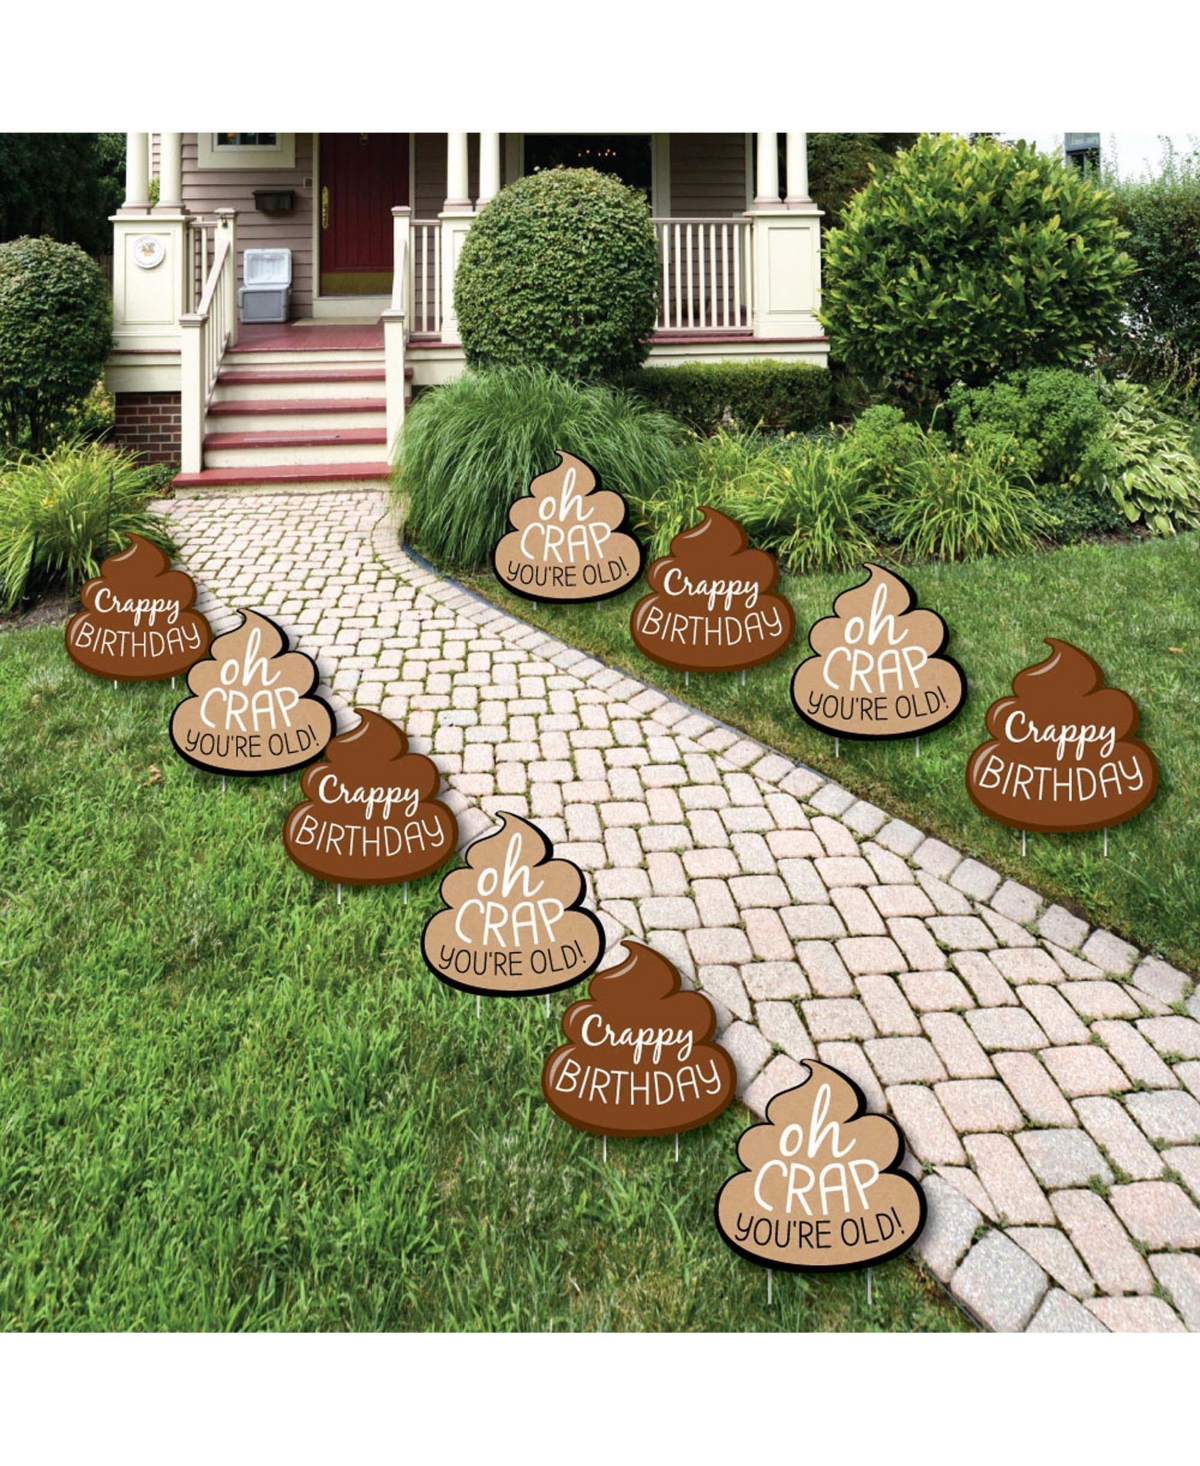 Oh Crap, Youre Old - Lawn Decor - Outdoor Poop Birthday Party Yard Decor 10 Pc